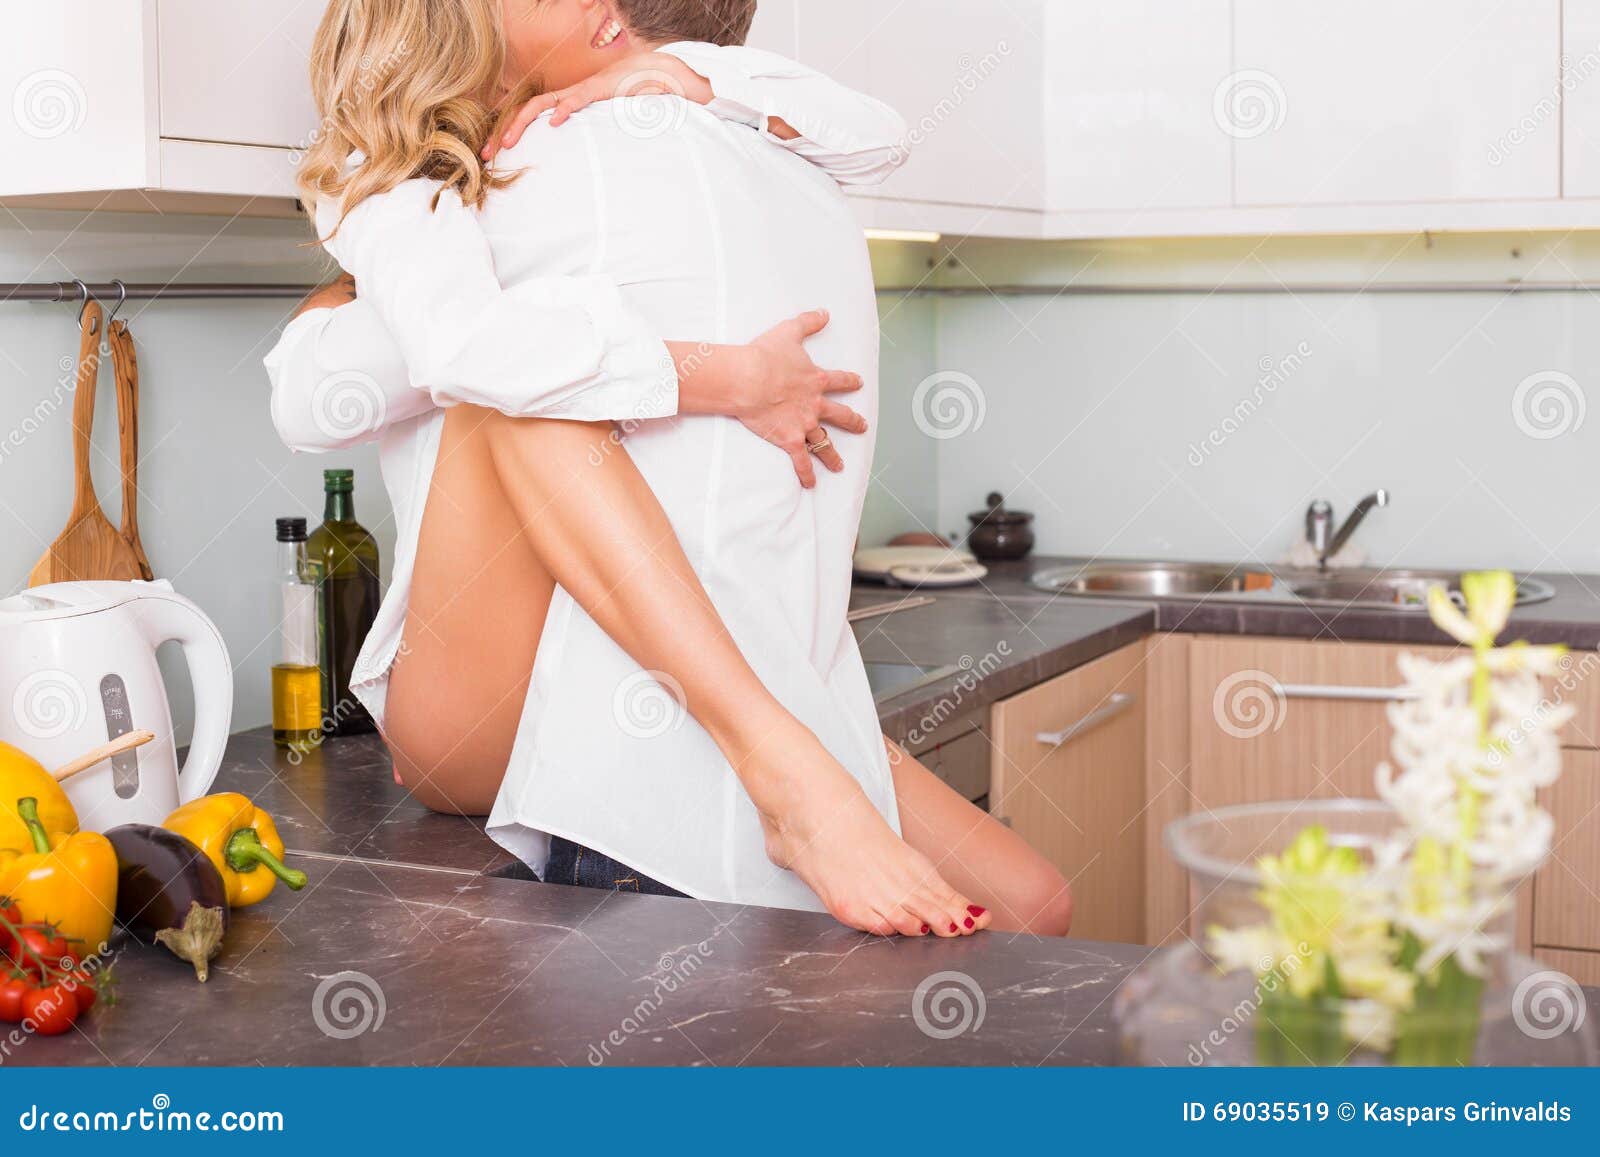 Couple Having Sex on Kitchen Counter Stock Image